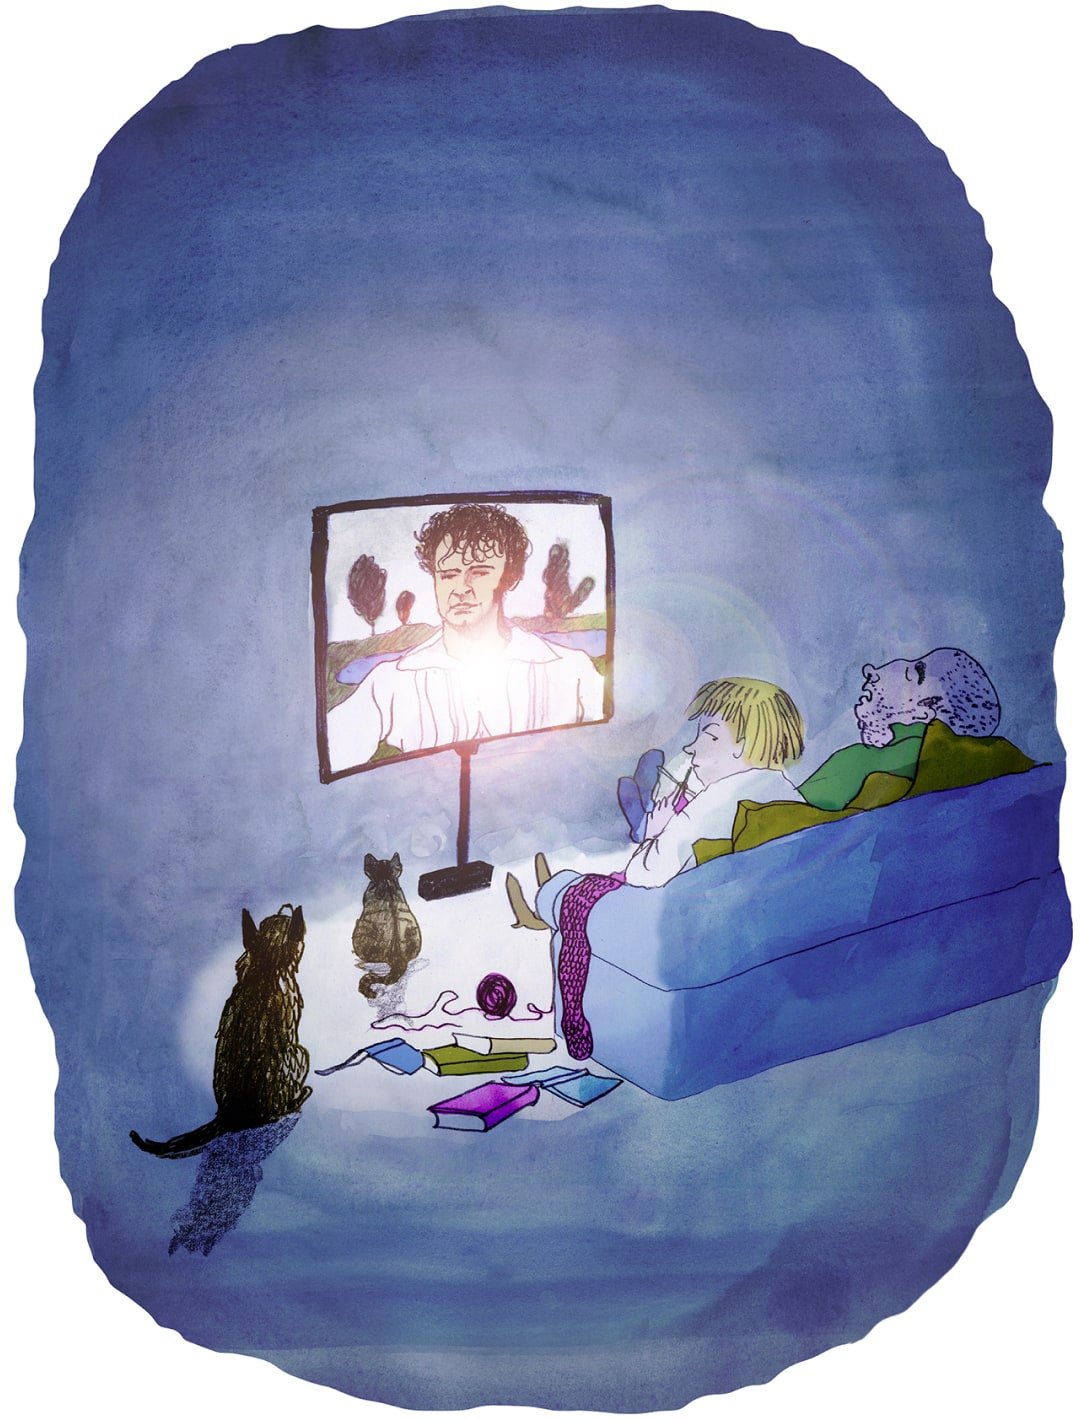 A couple and their two cats sit in the glow of light from a TV screen. The woman is knitting whilst the man snores. The two cats are watching the face of a man on the TV screen.